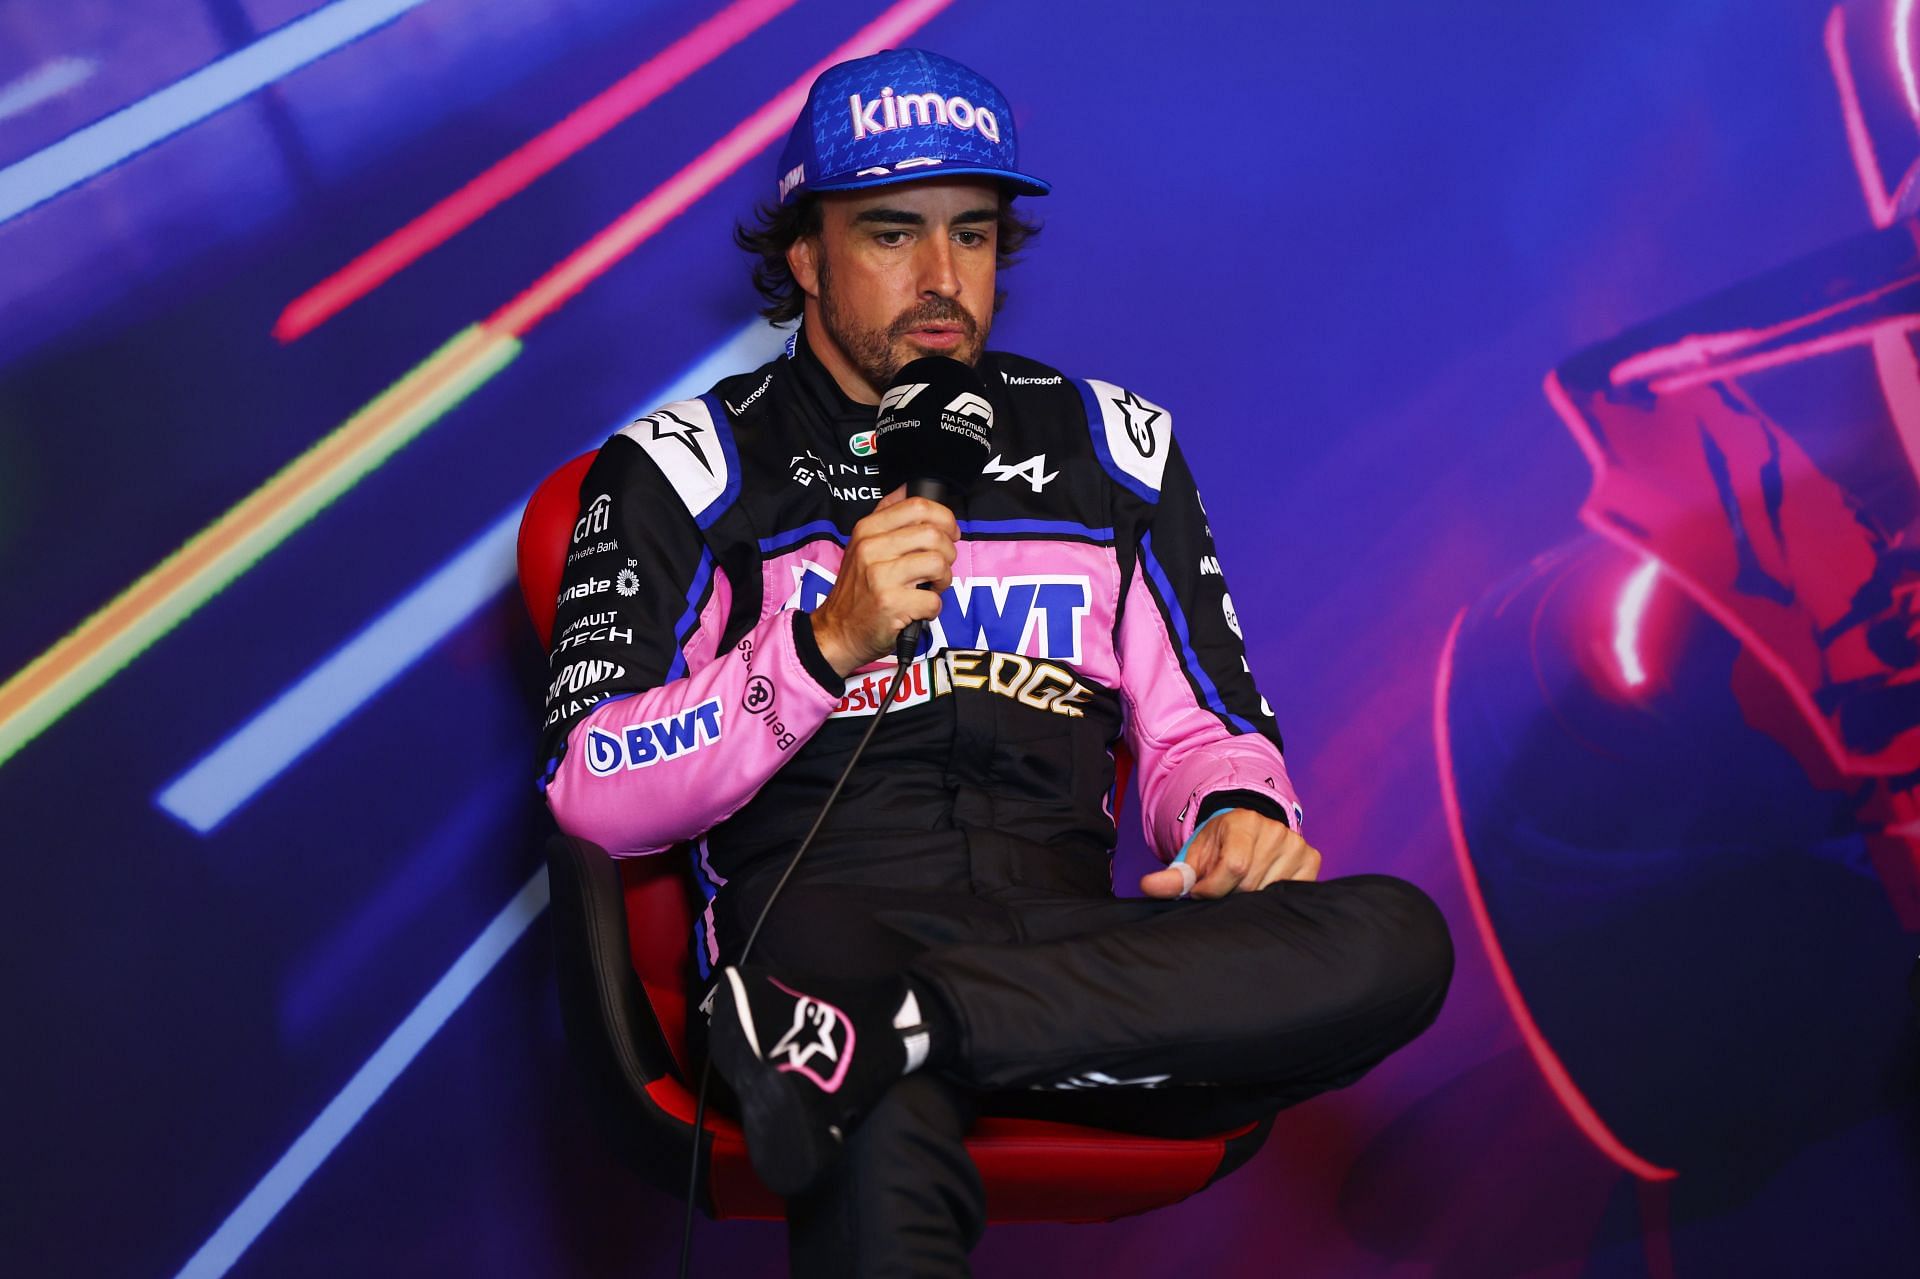 Fernando Alonso feels that the sport is still far too predictable despite the new regulations